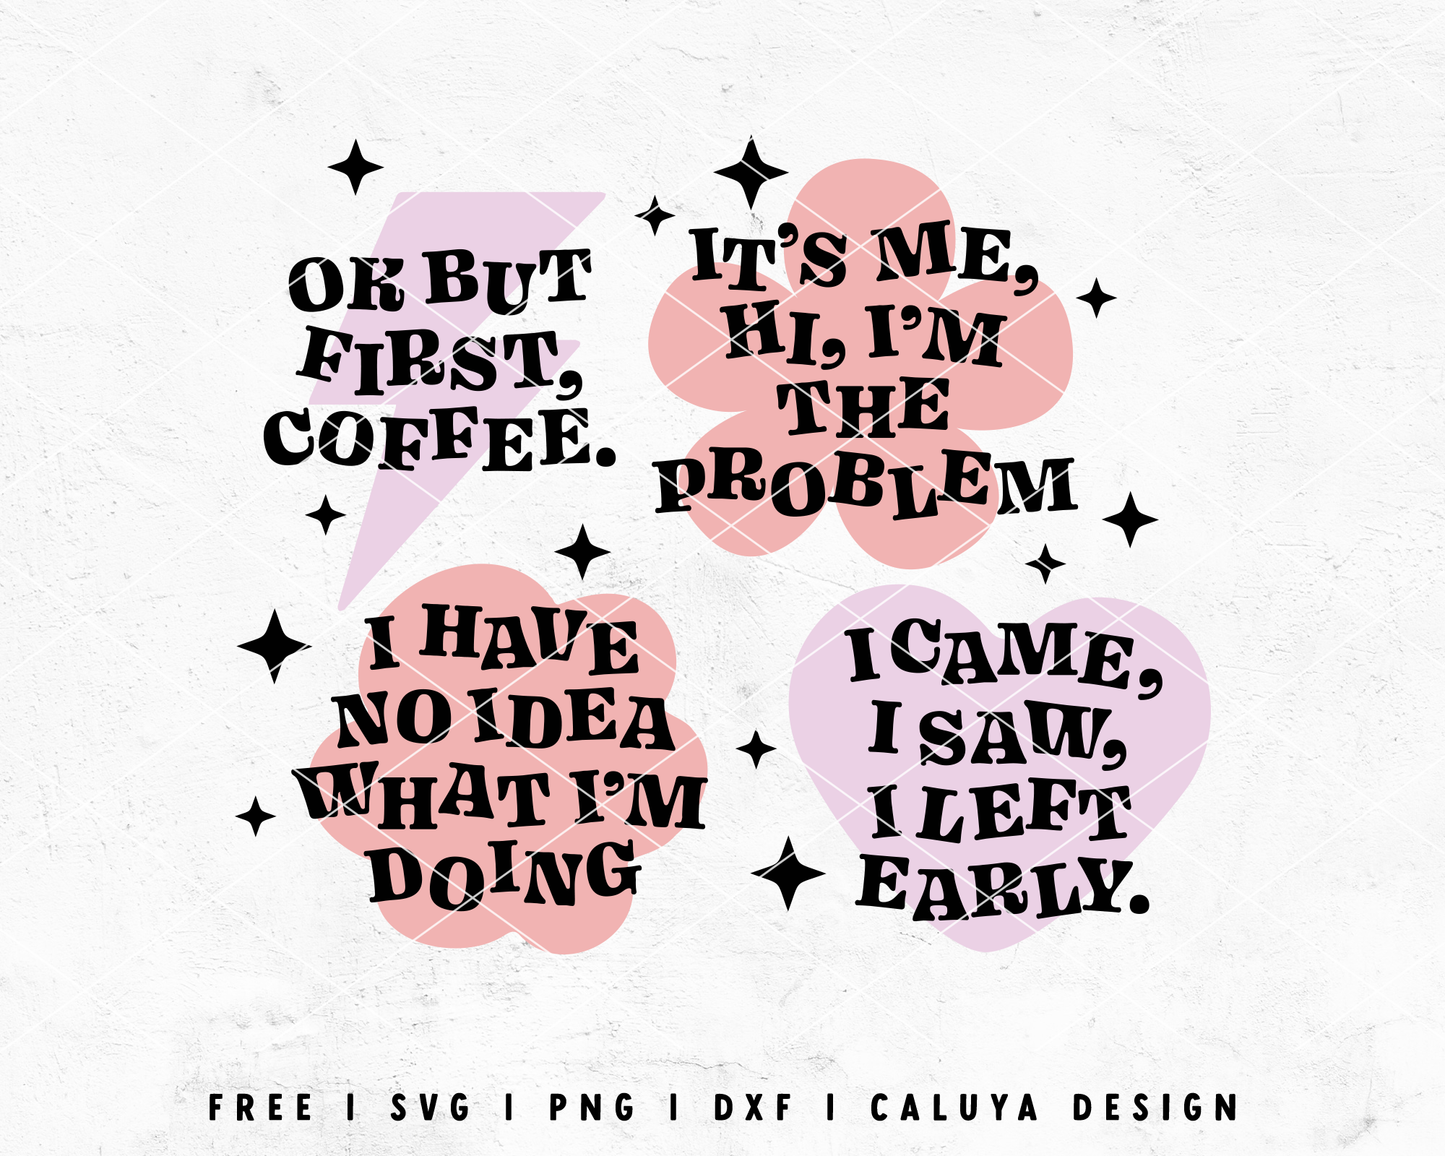 FREE Funny Girl SVG | Sarcastic Quote SVG Cut File for Cricut, Cameo Silhouette | Free SVG Cut File